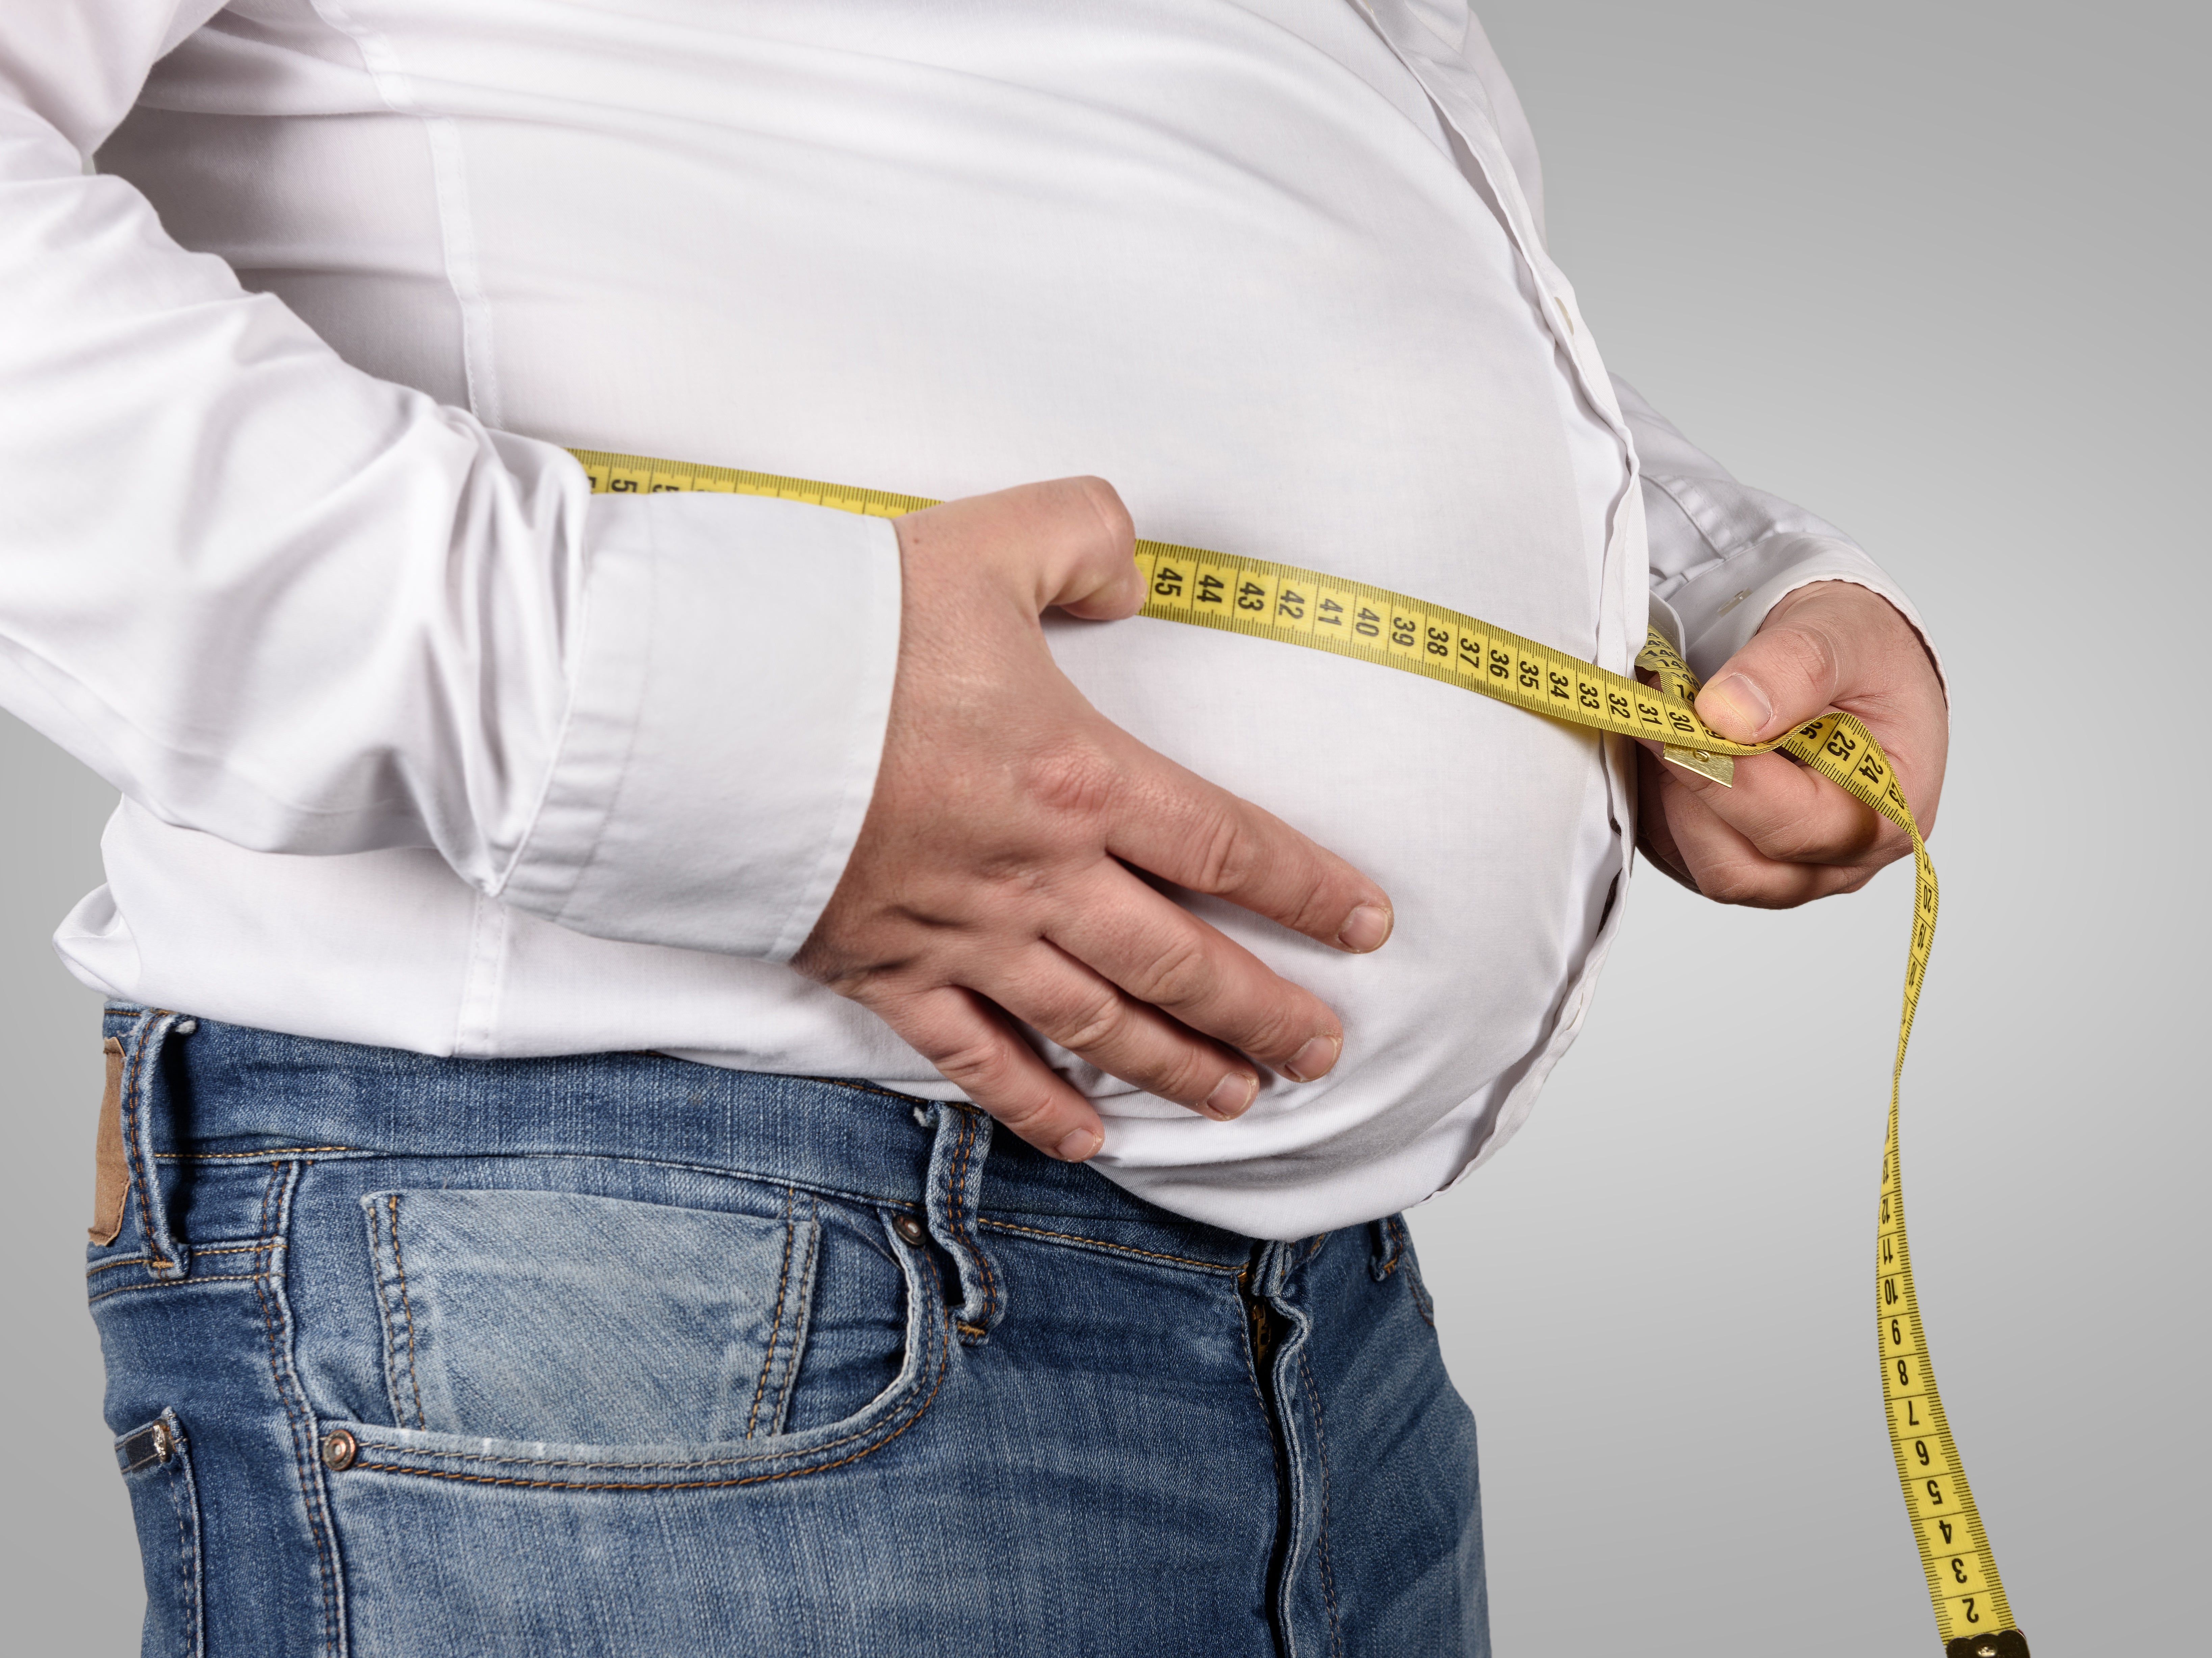 A study has found obesity is now a bigger killer than smoking in England and Scotland